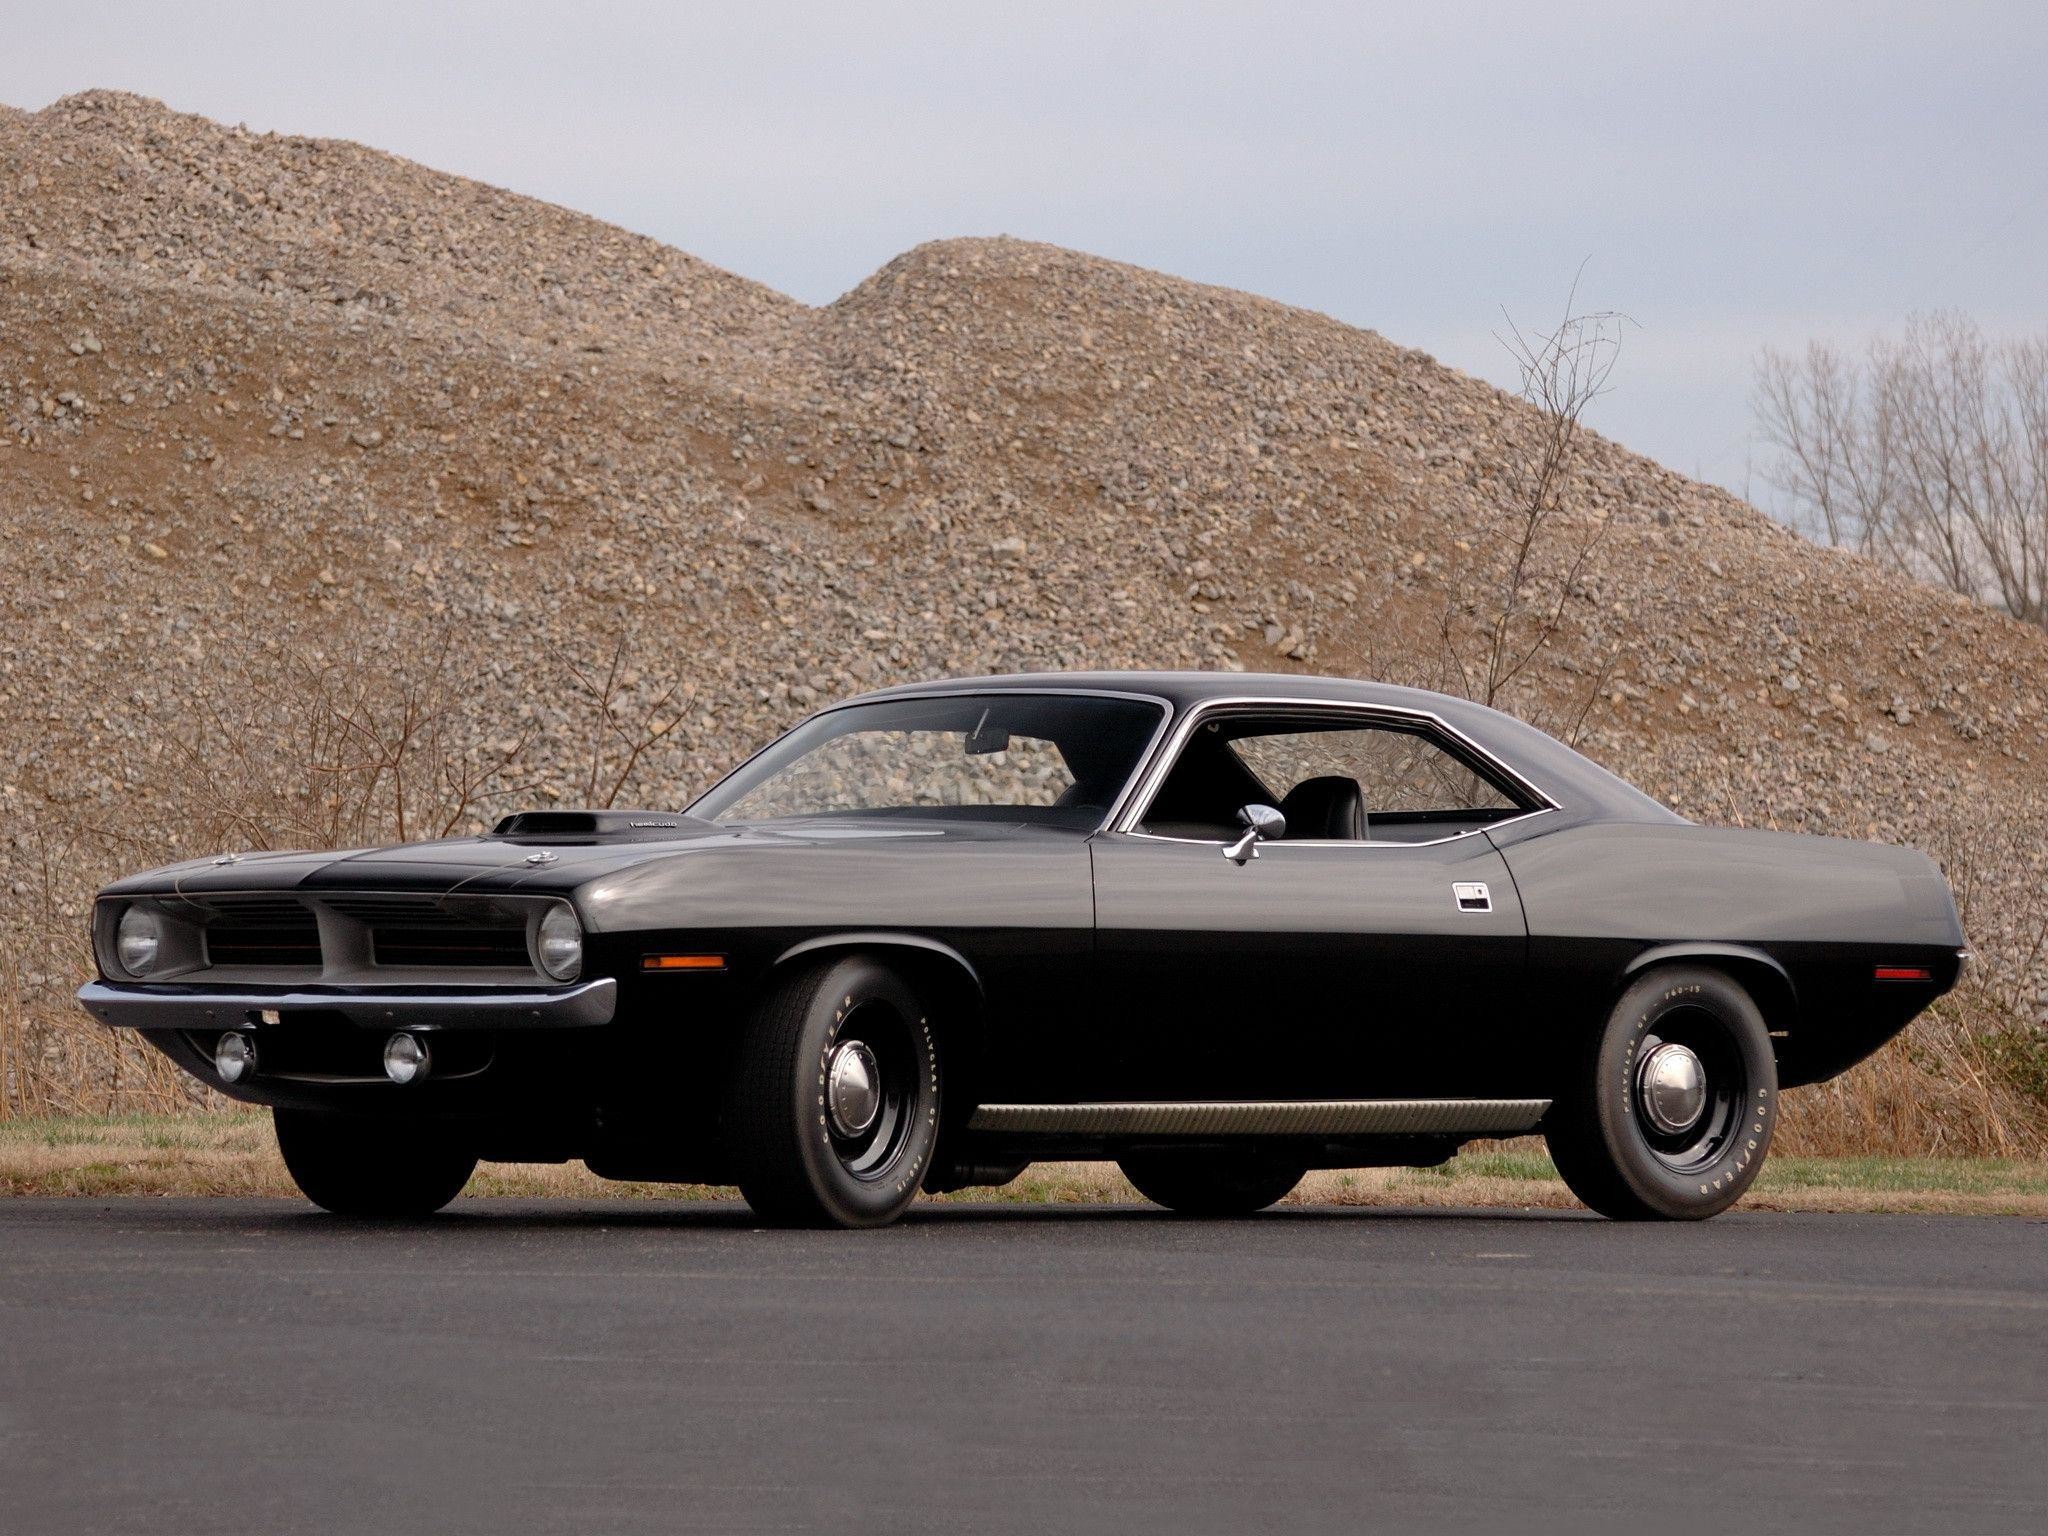 2048x1536 Daily Wallpaper: Plymouth Barracuda | I Like To Waste My Time